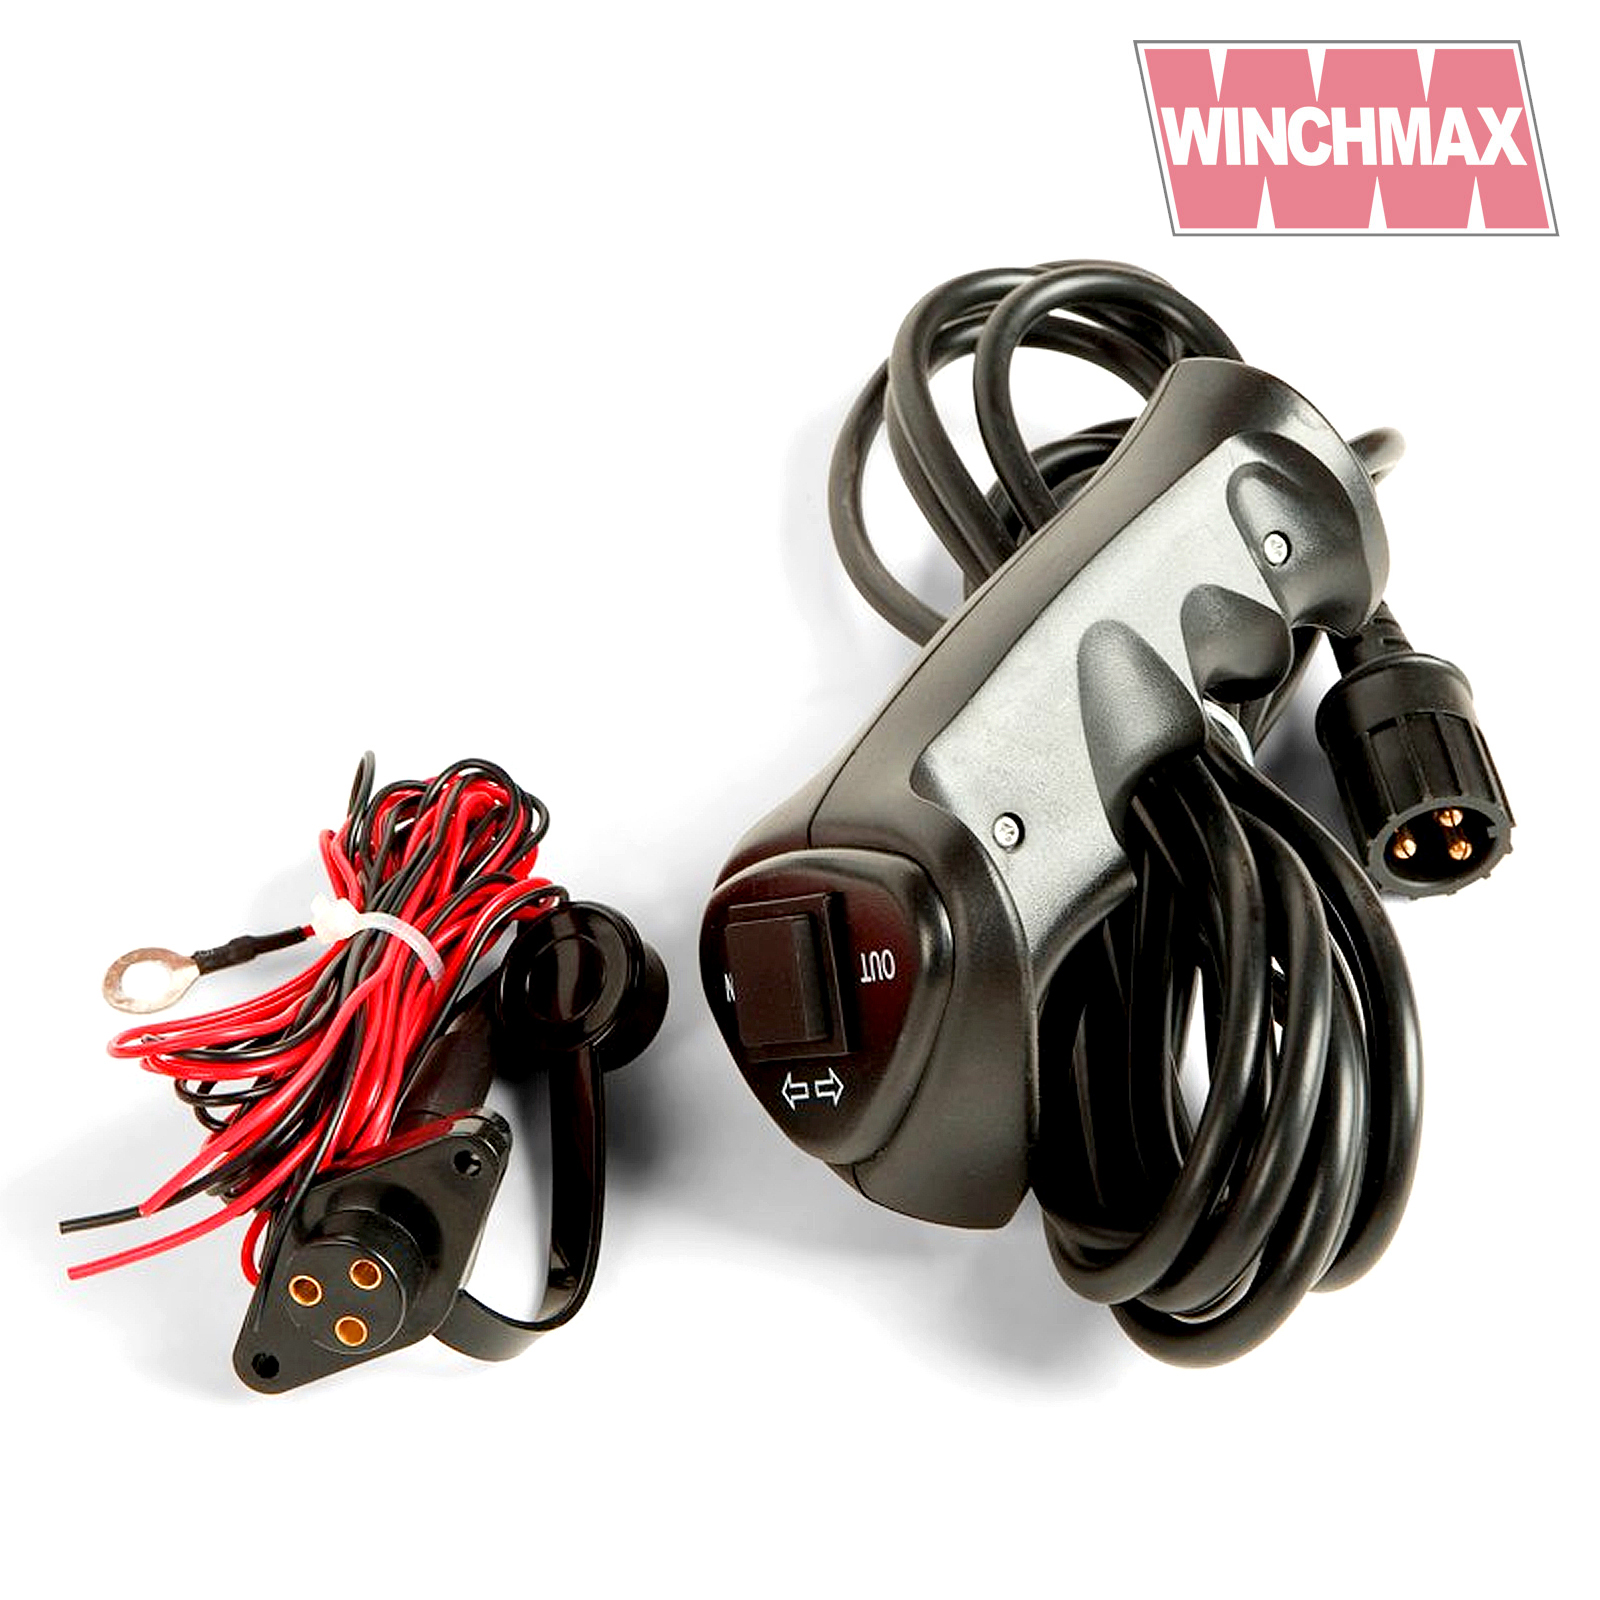 Winchmax 2000lb Hydraulic Winch. Steel Rope and Control System